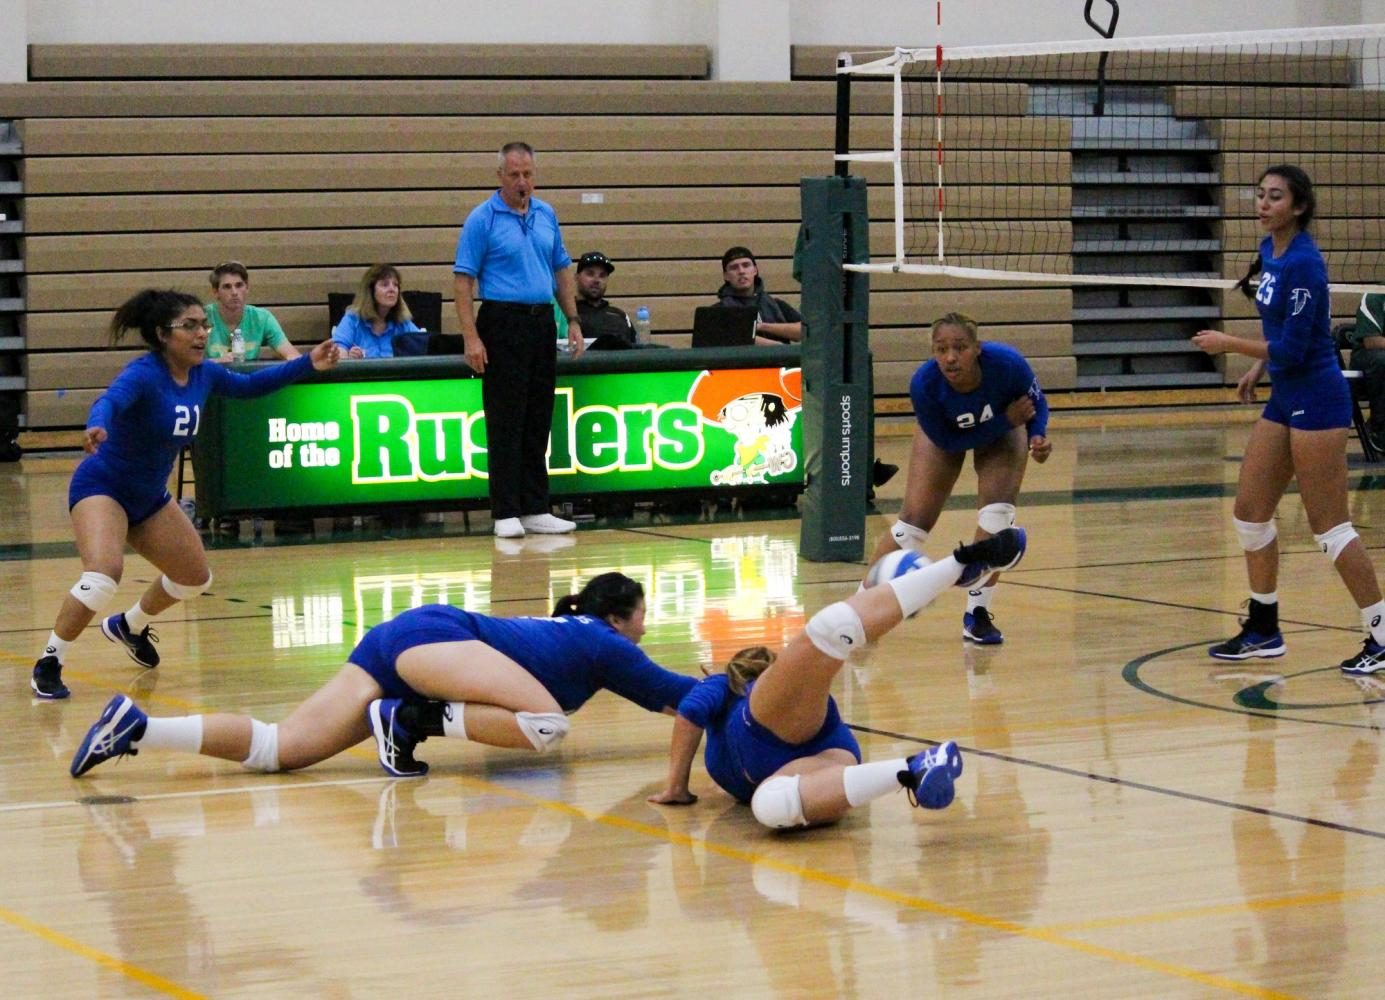 Cerritos College freshman #17 Jody Suski and freshman #4 Nataly Reynoso both dive after a ball during Fridays game against Golden West. The Falcons were swept by the Rustlers in 3 games. Photo credit: Lindsay Helberg